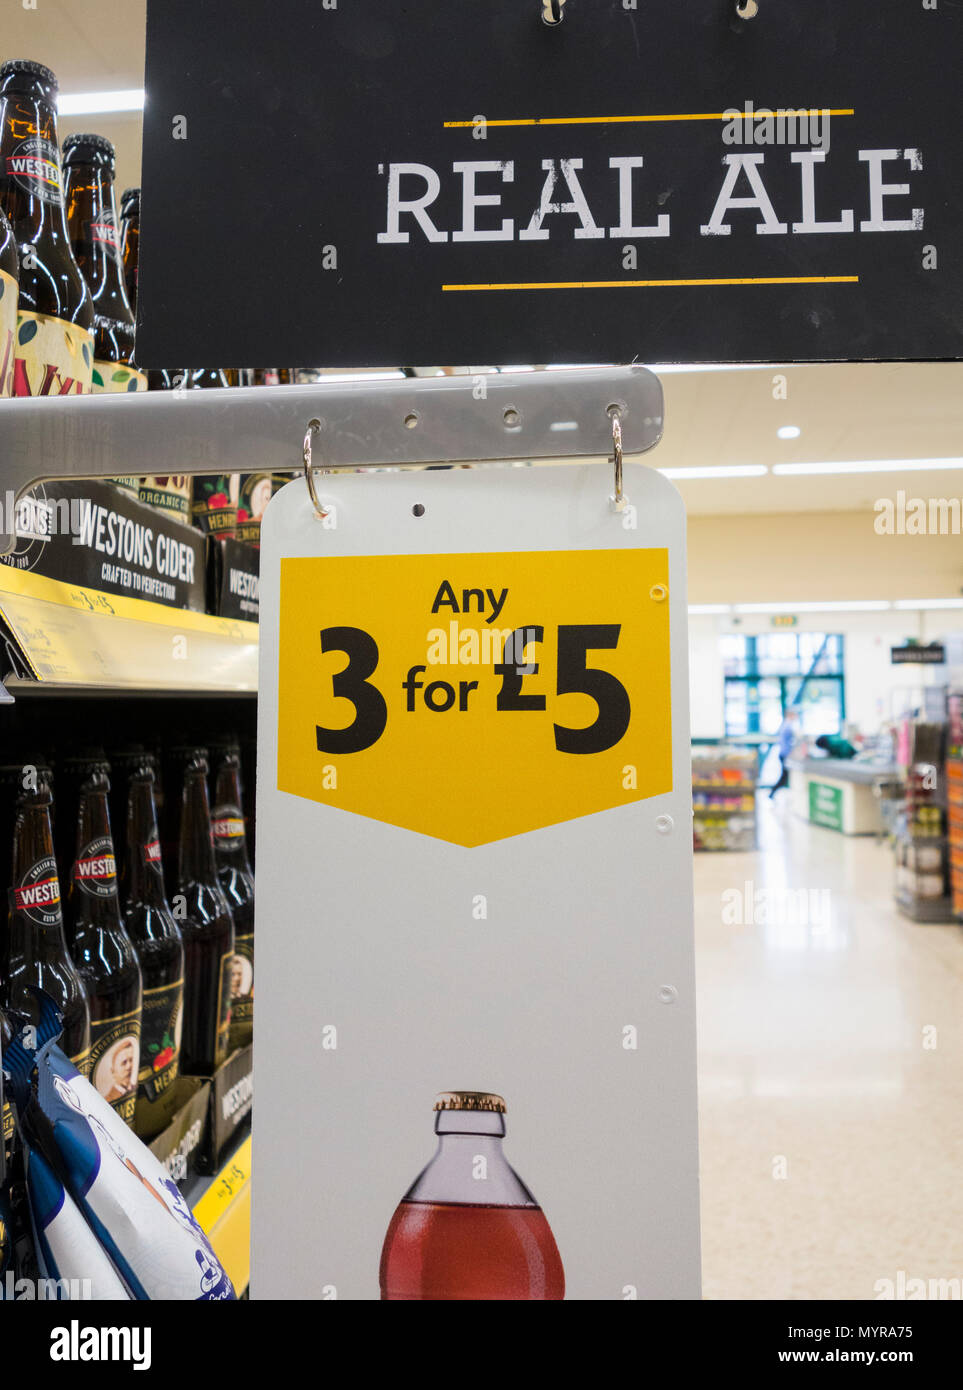 Real Ale offer in supermarket. UK Stock Photo